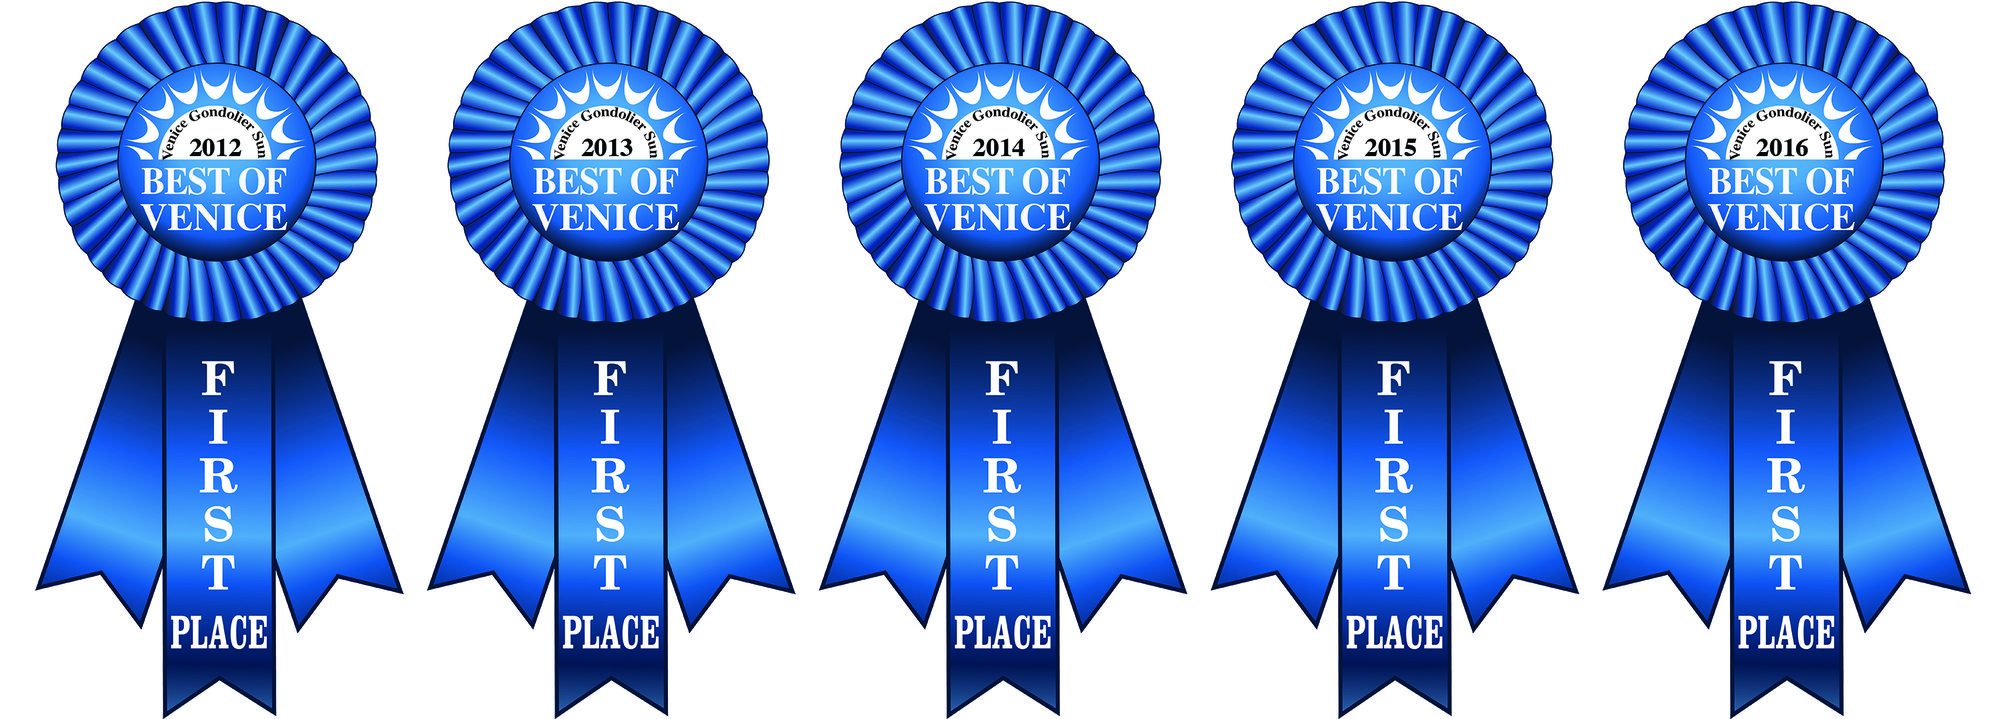 Best of Venice Blue Ribbons